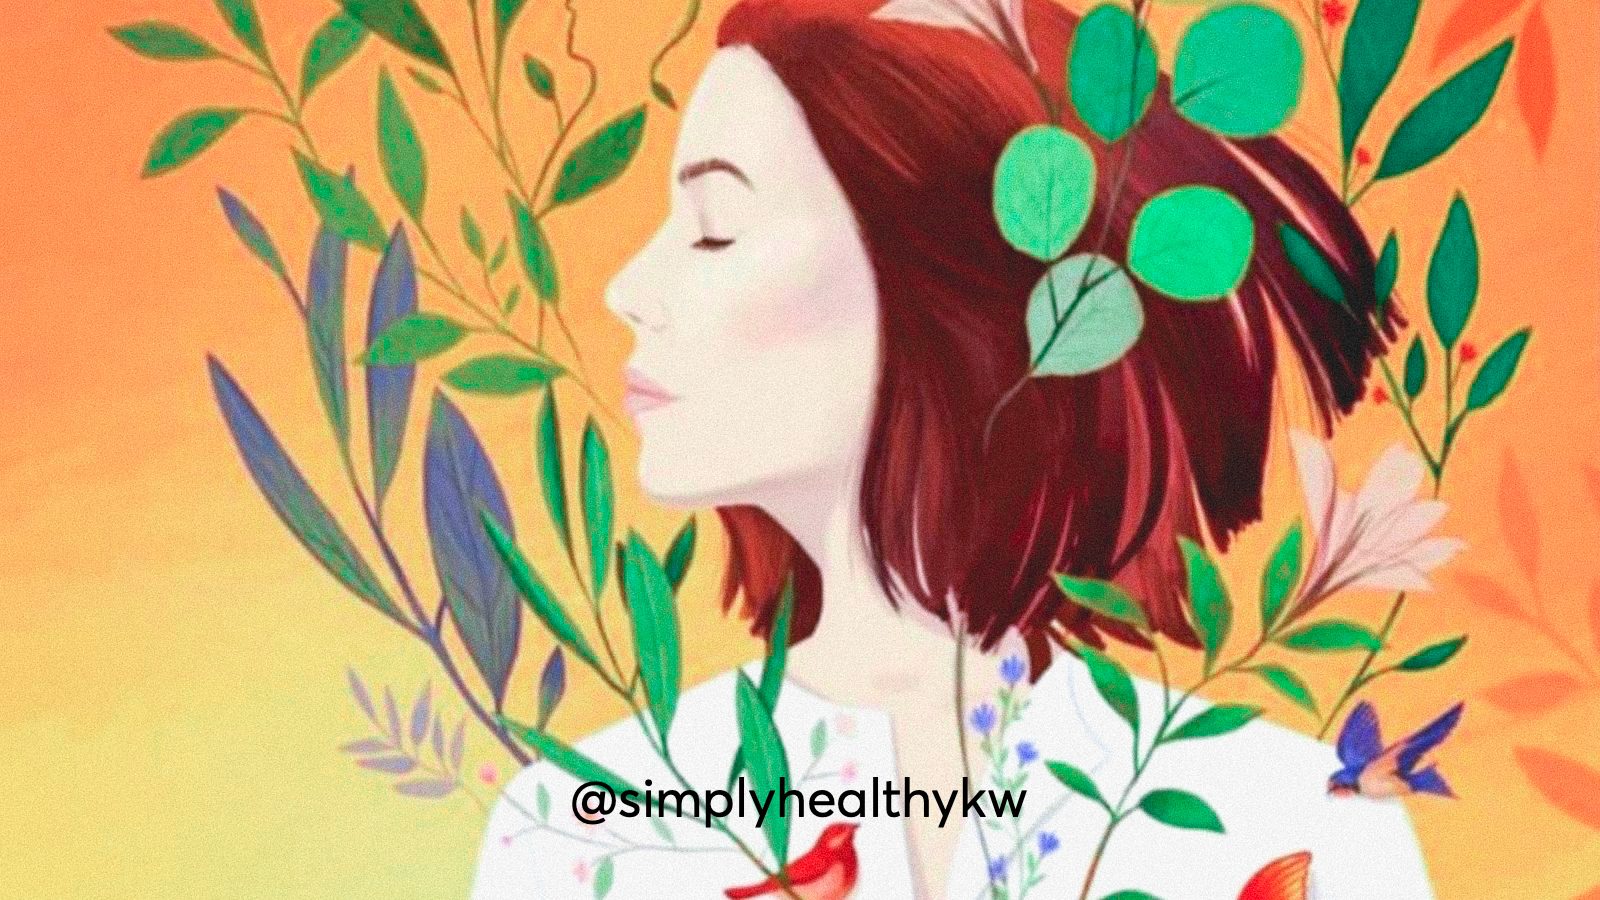 An illustration of a woman surrounded by plants to depict healthy habits